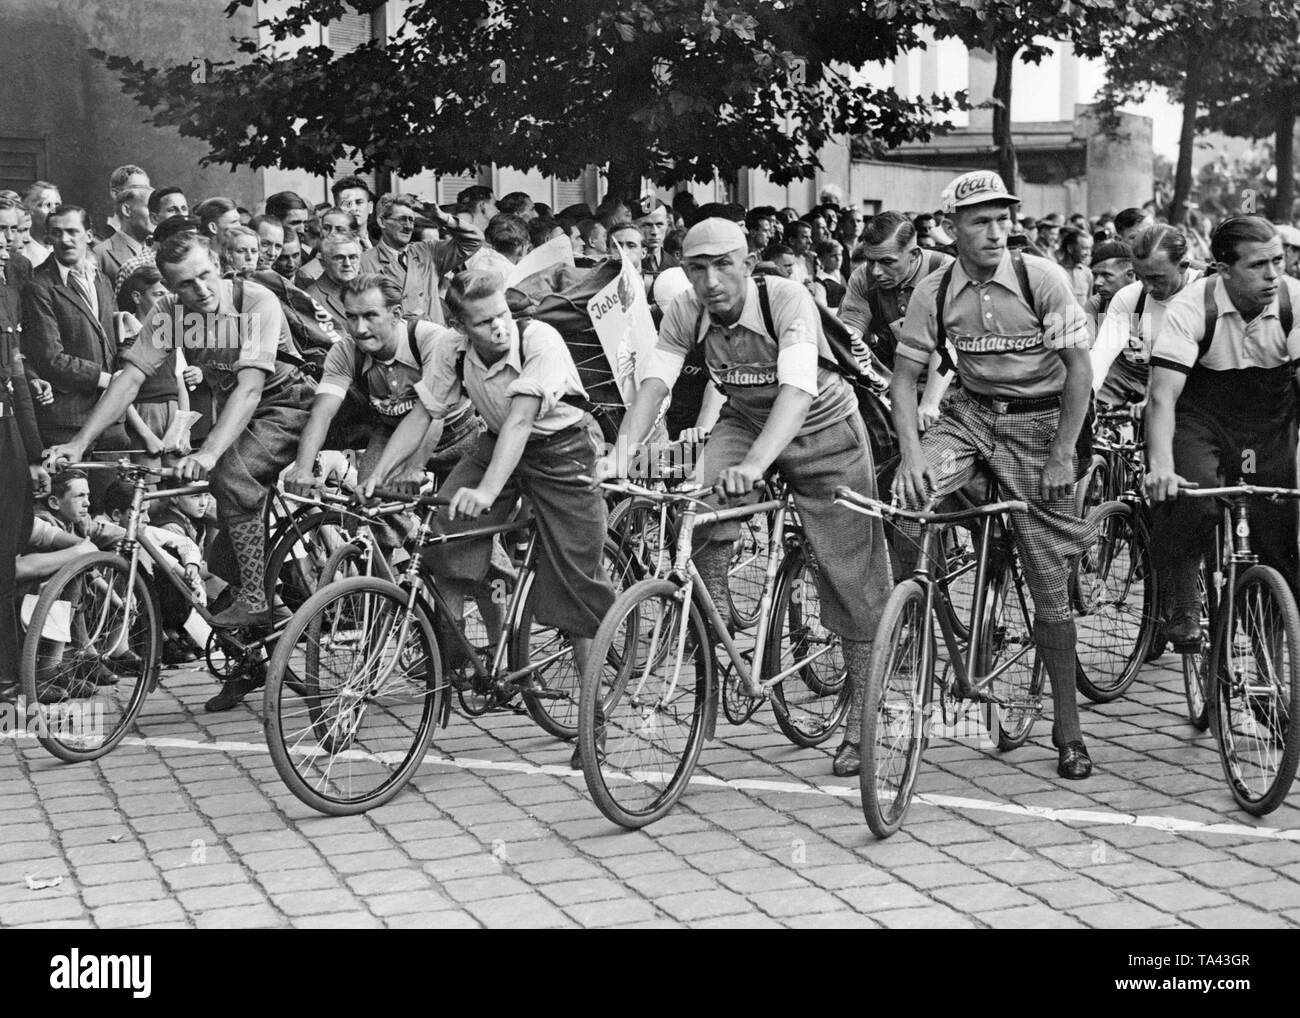 The participants of the Championship of Paperboys of Scherl are ready to start the race in the Siemensstrasse in Berlin-Moabit. They carry backpacks. Stock Photo